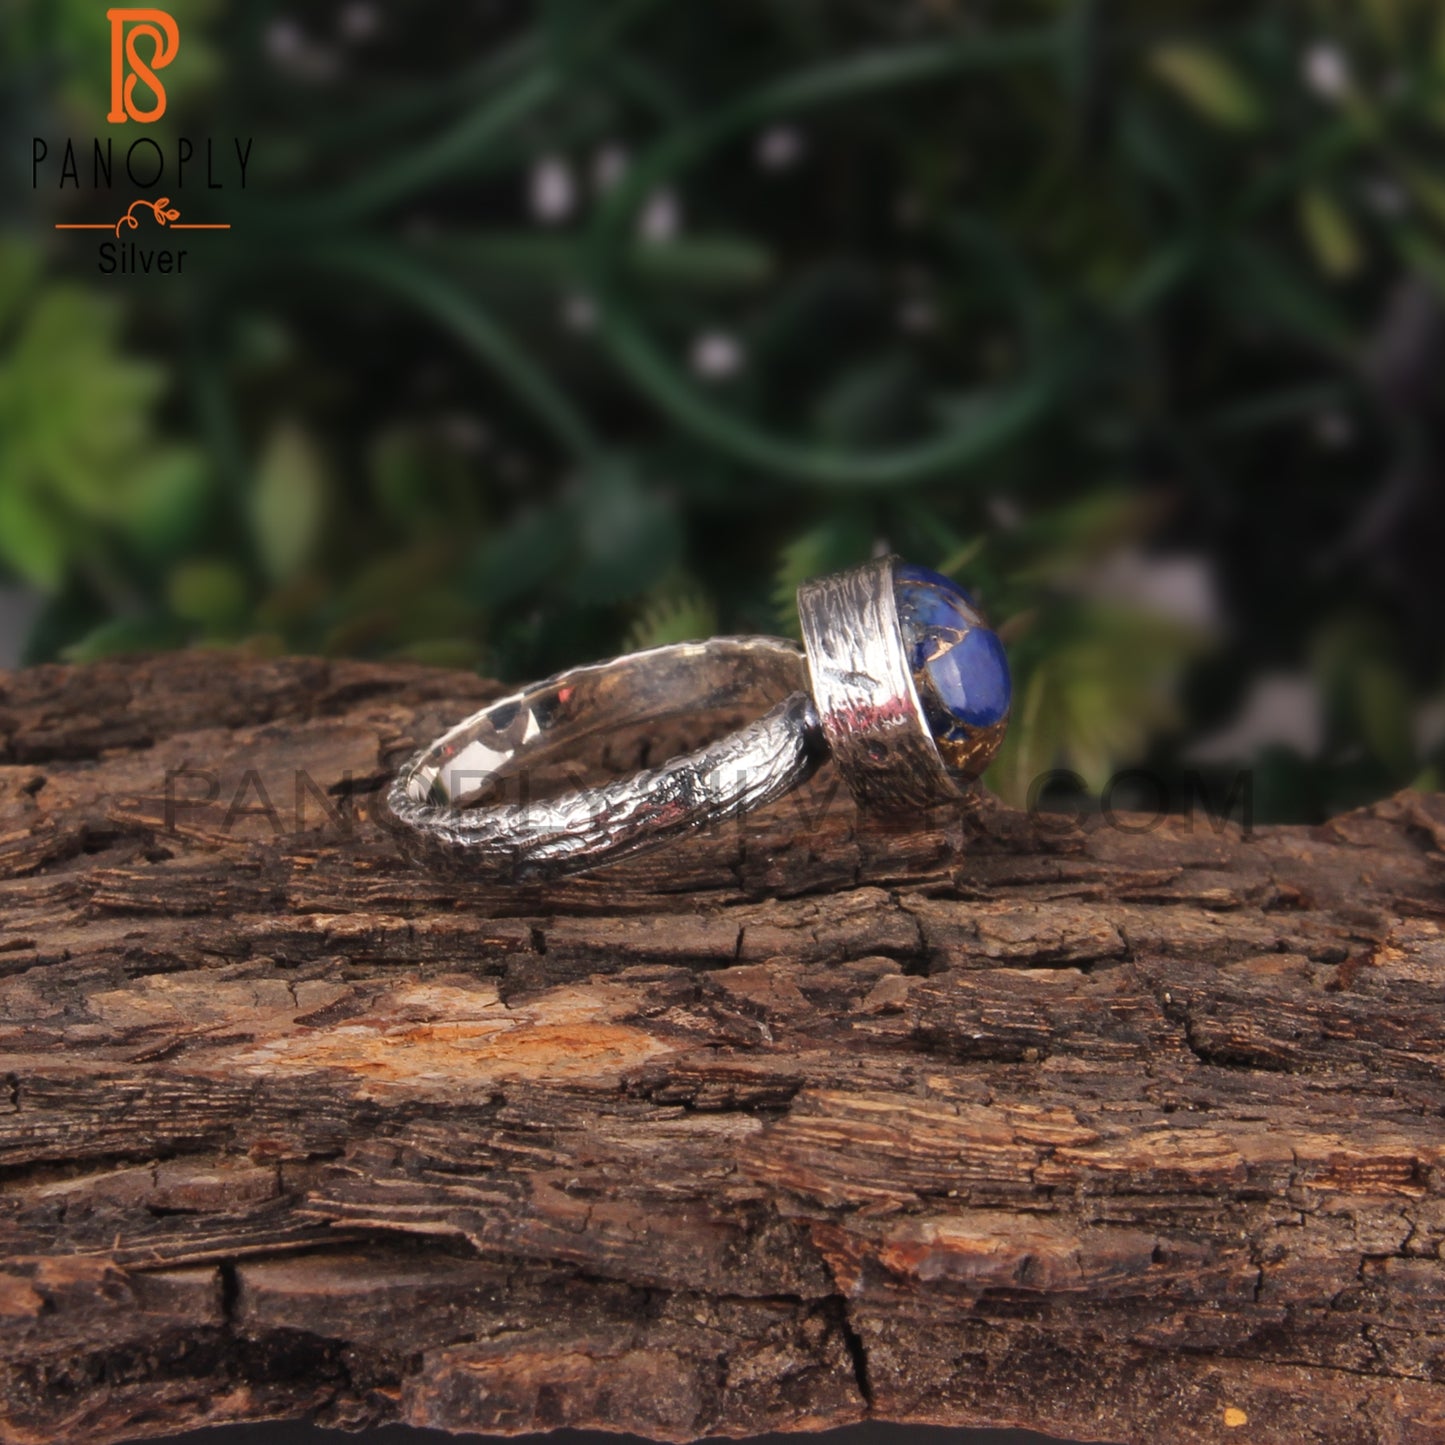 Natural Mojave Copper Lapis 925 Silver Engagement Ring